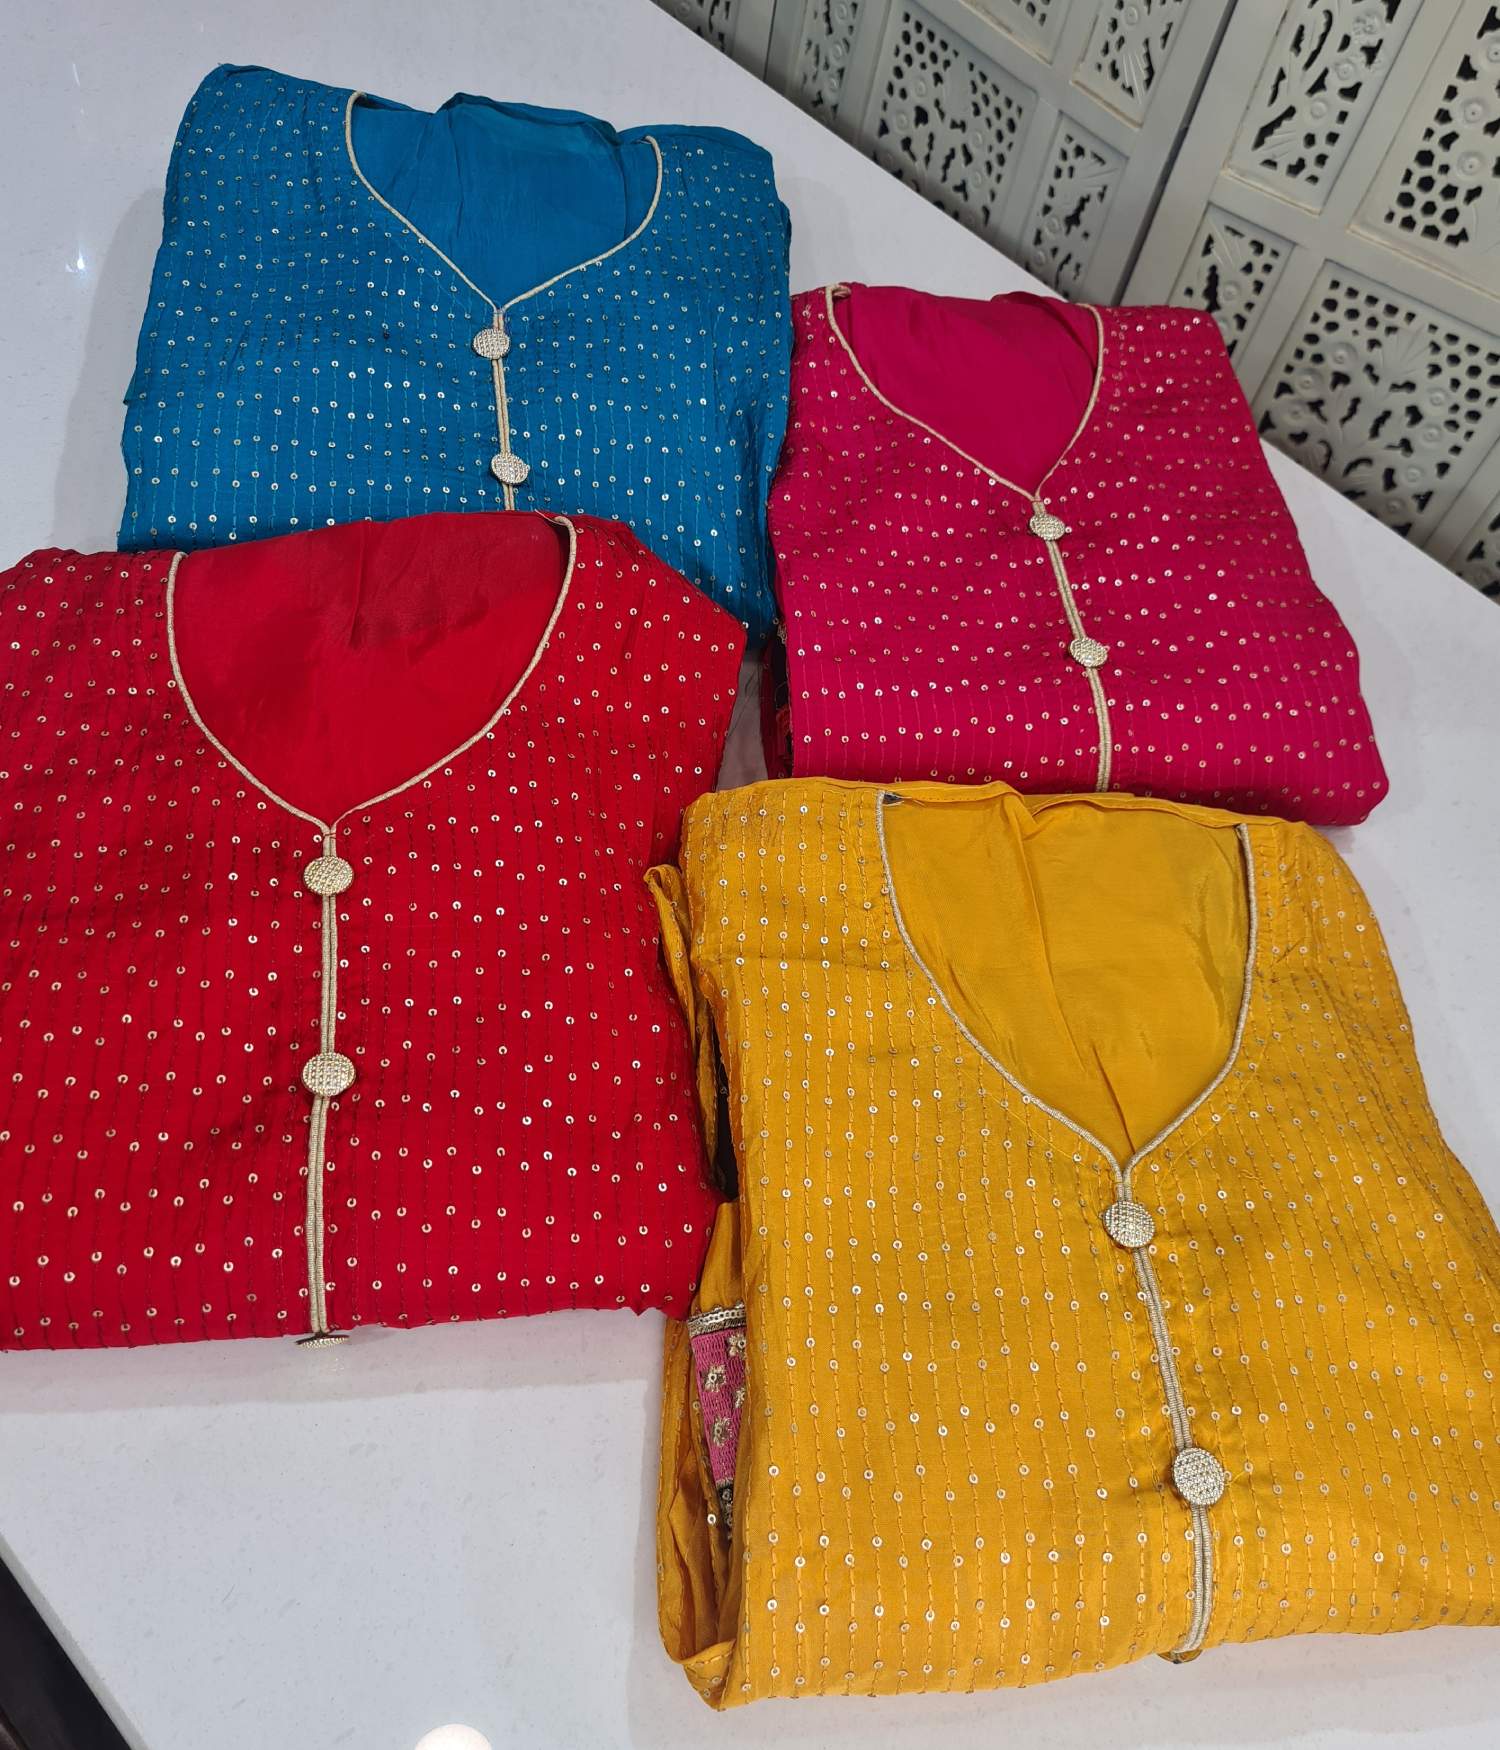 Partywear Unstitched Suit-spendworthclothing-Color_Firozi,Color_Rani,Color_Red,Color_Yellow,Easy-Returns,Free-Shipping,Item Type_Unstitch Suit,Material_Georgette,Size_Large,Size_Medium,Size_Small,Size_XL,Speedy-Deliveries,Unstich Suits